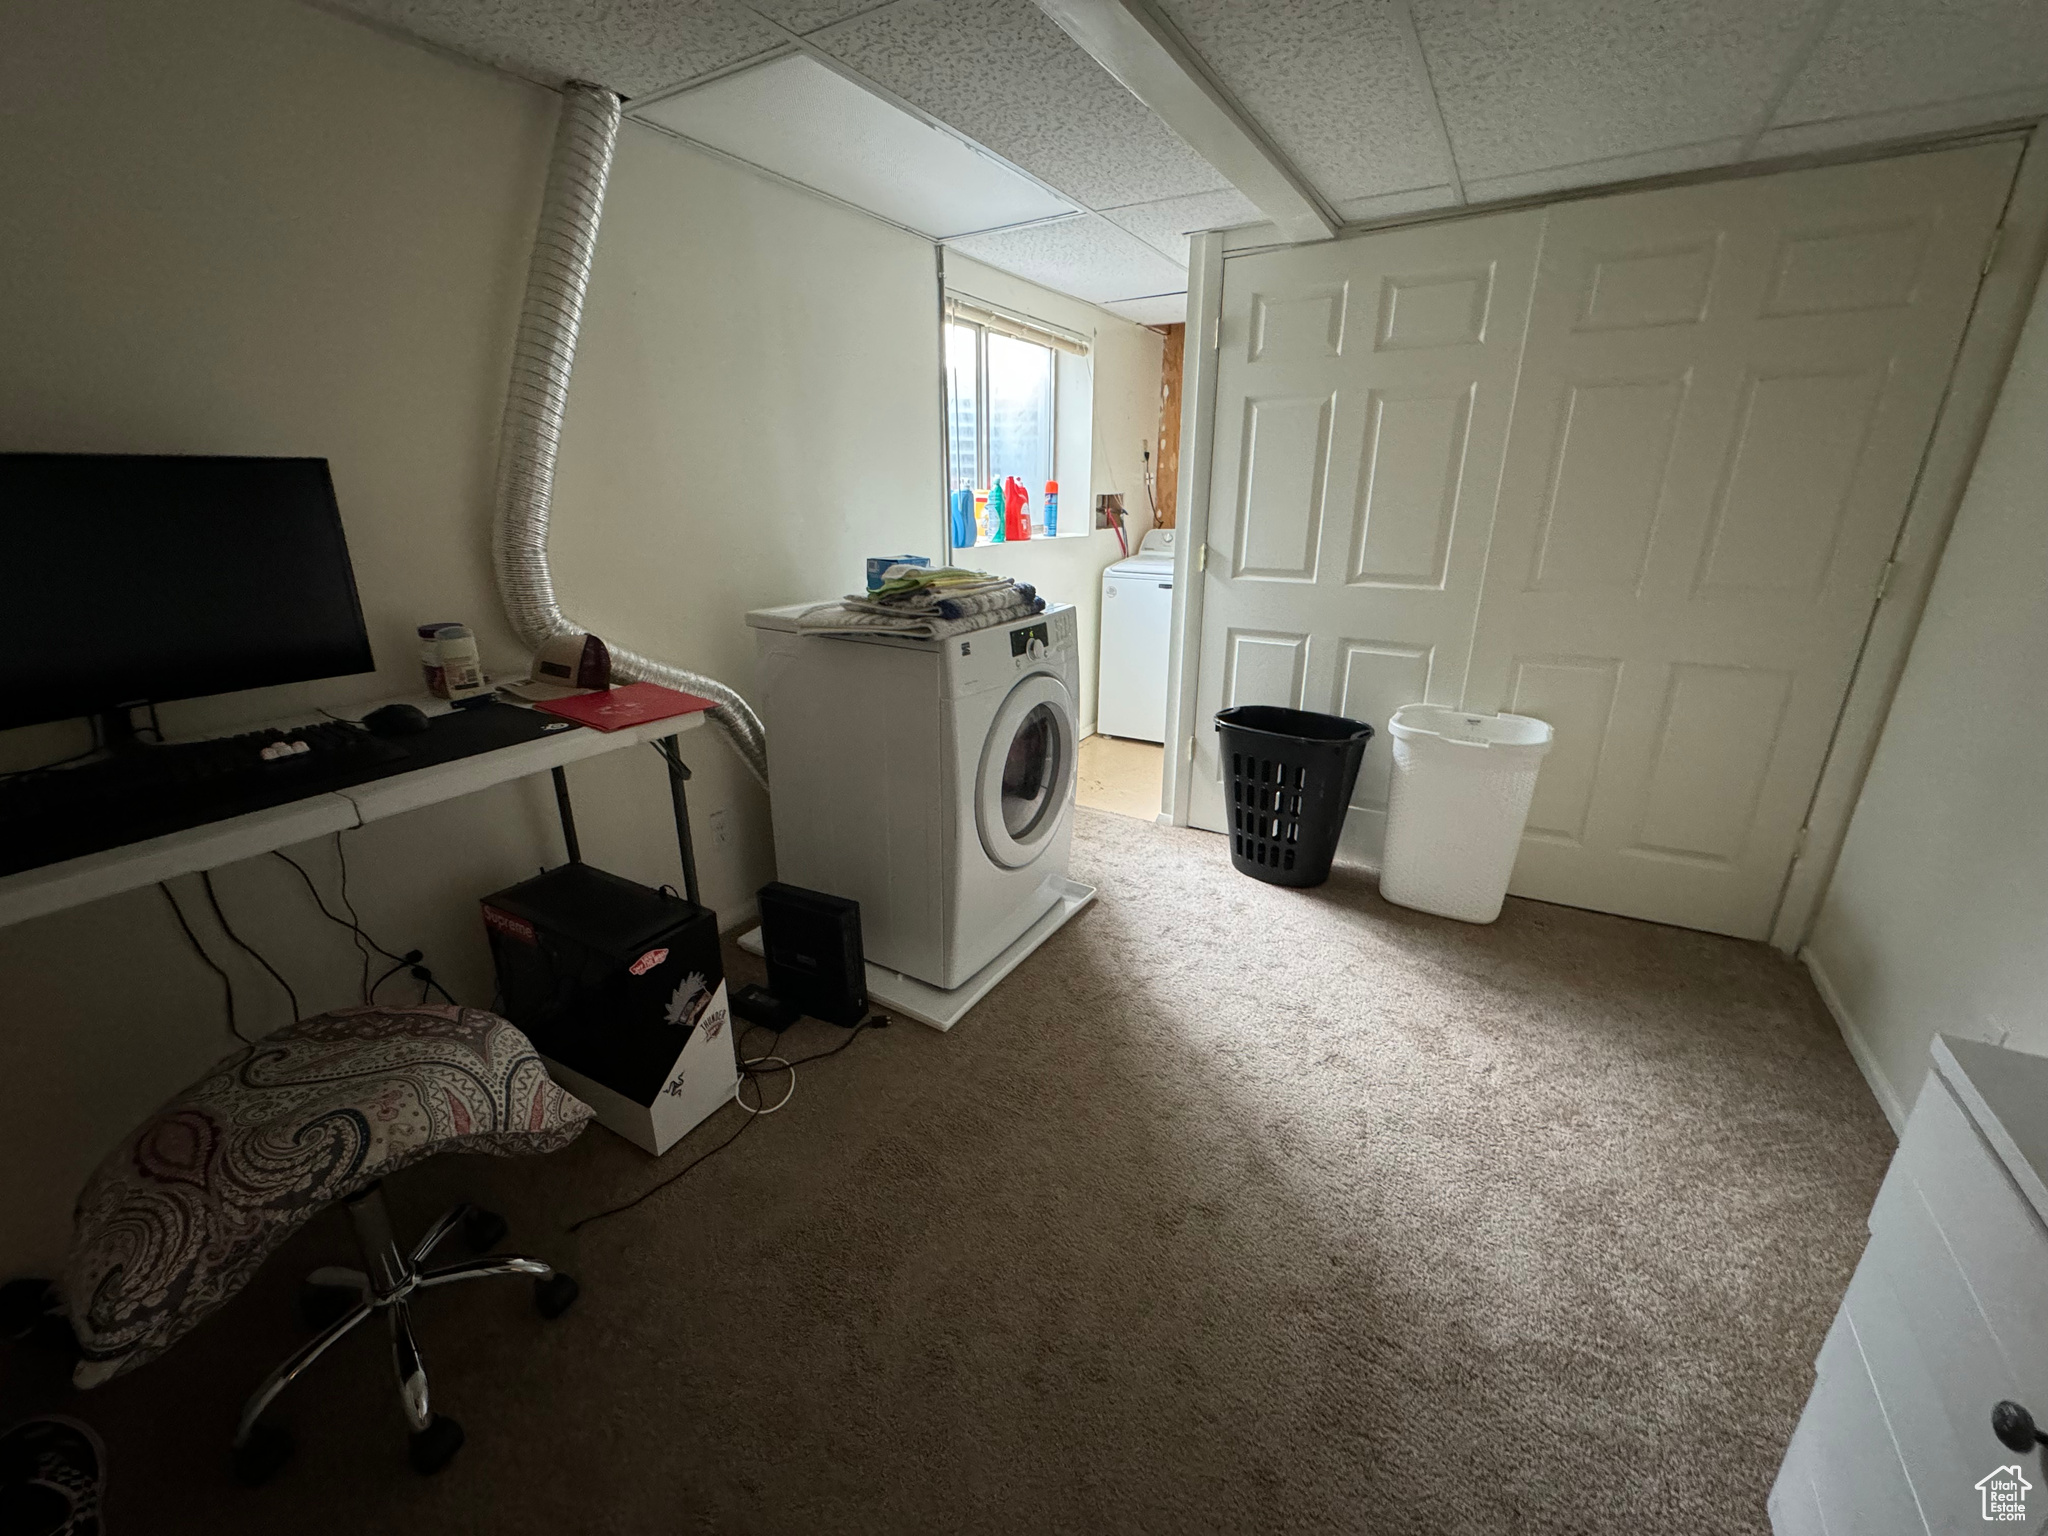 Interior space with carpet floors and washer / dryer